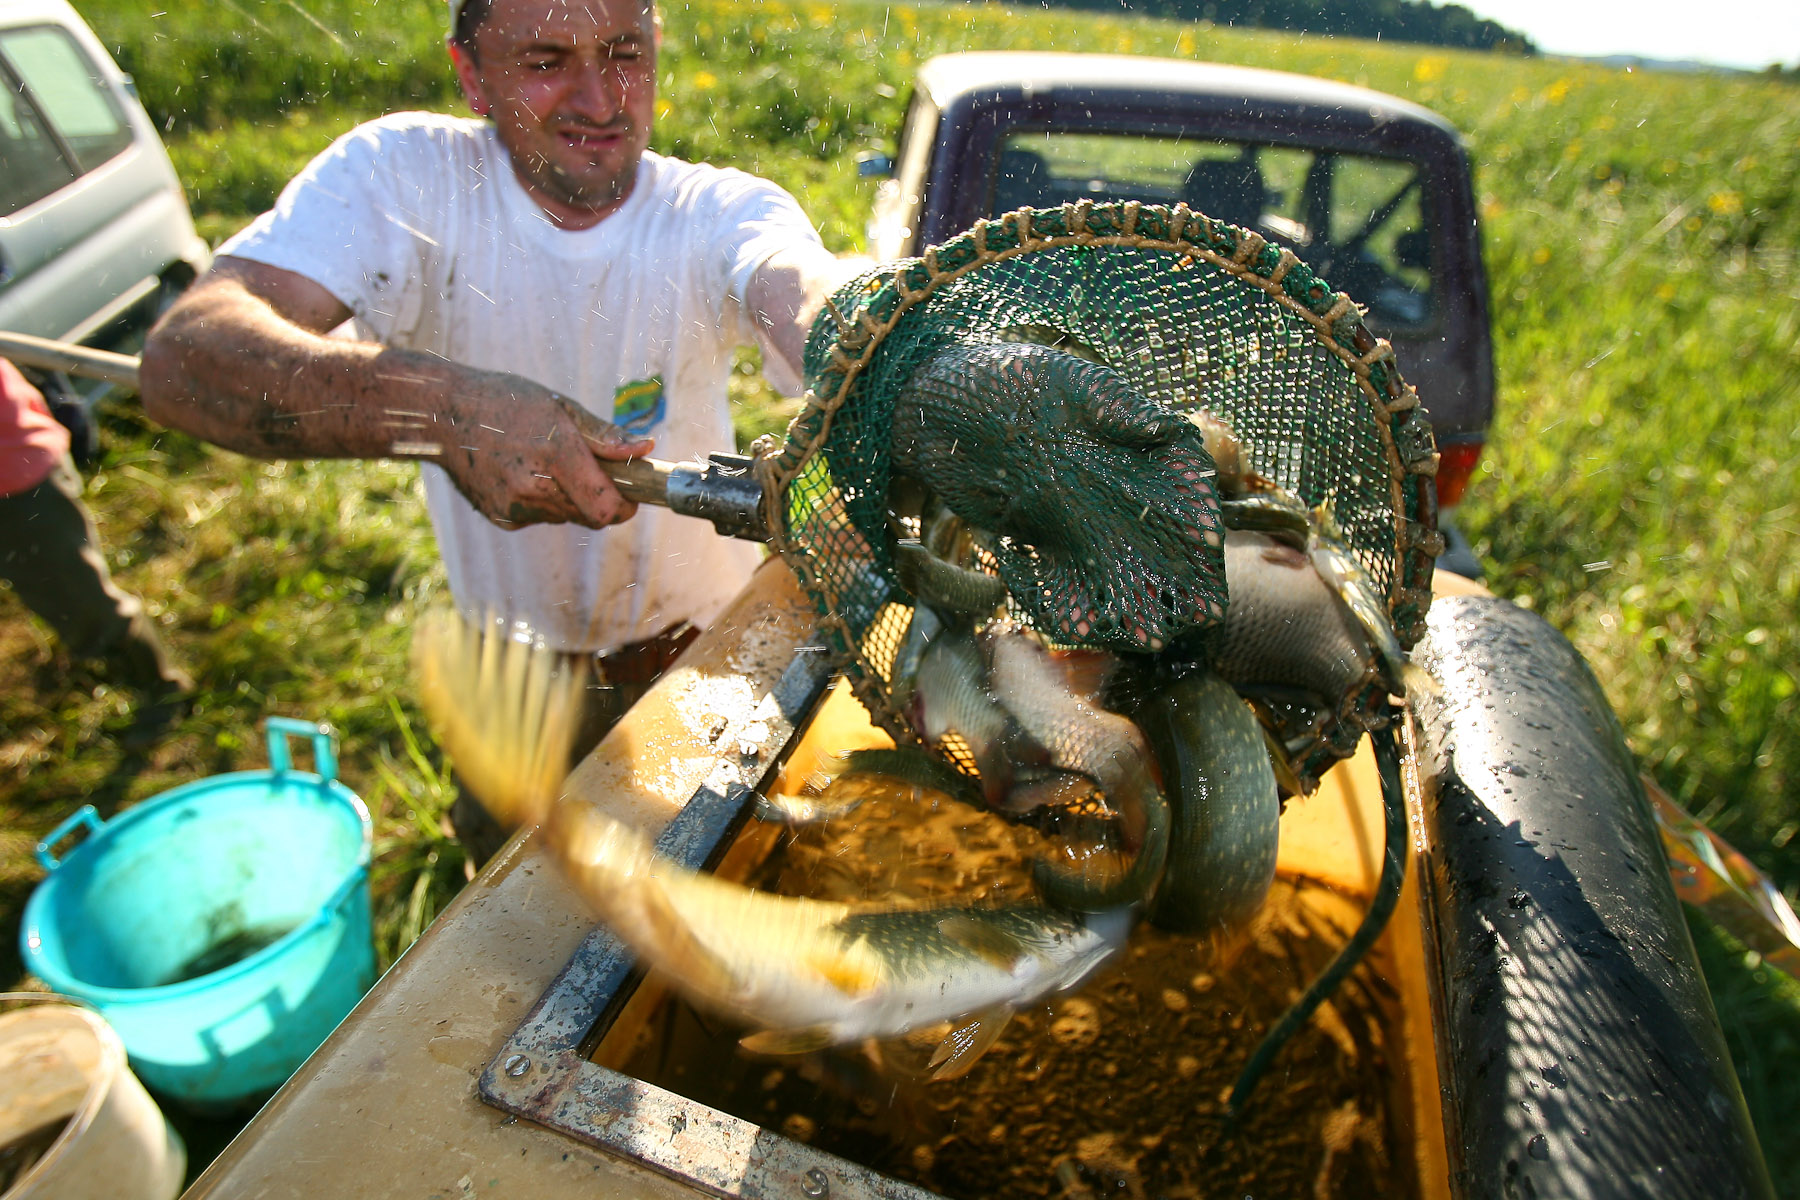 Toni Urbas releases the fish into an 800-liter tank with oxygen that carries the fish from remote parts of the lake to the Rešeto pond or the Stržen stream.